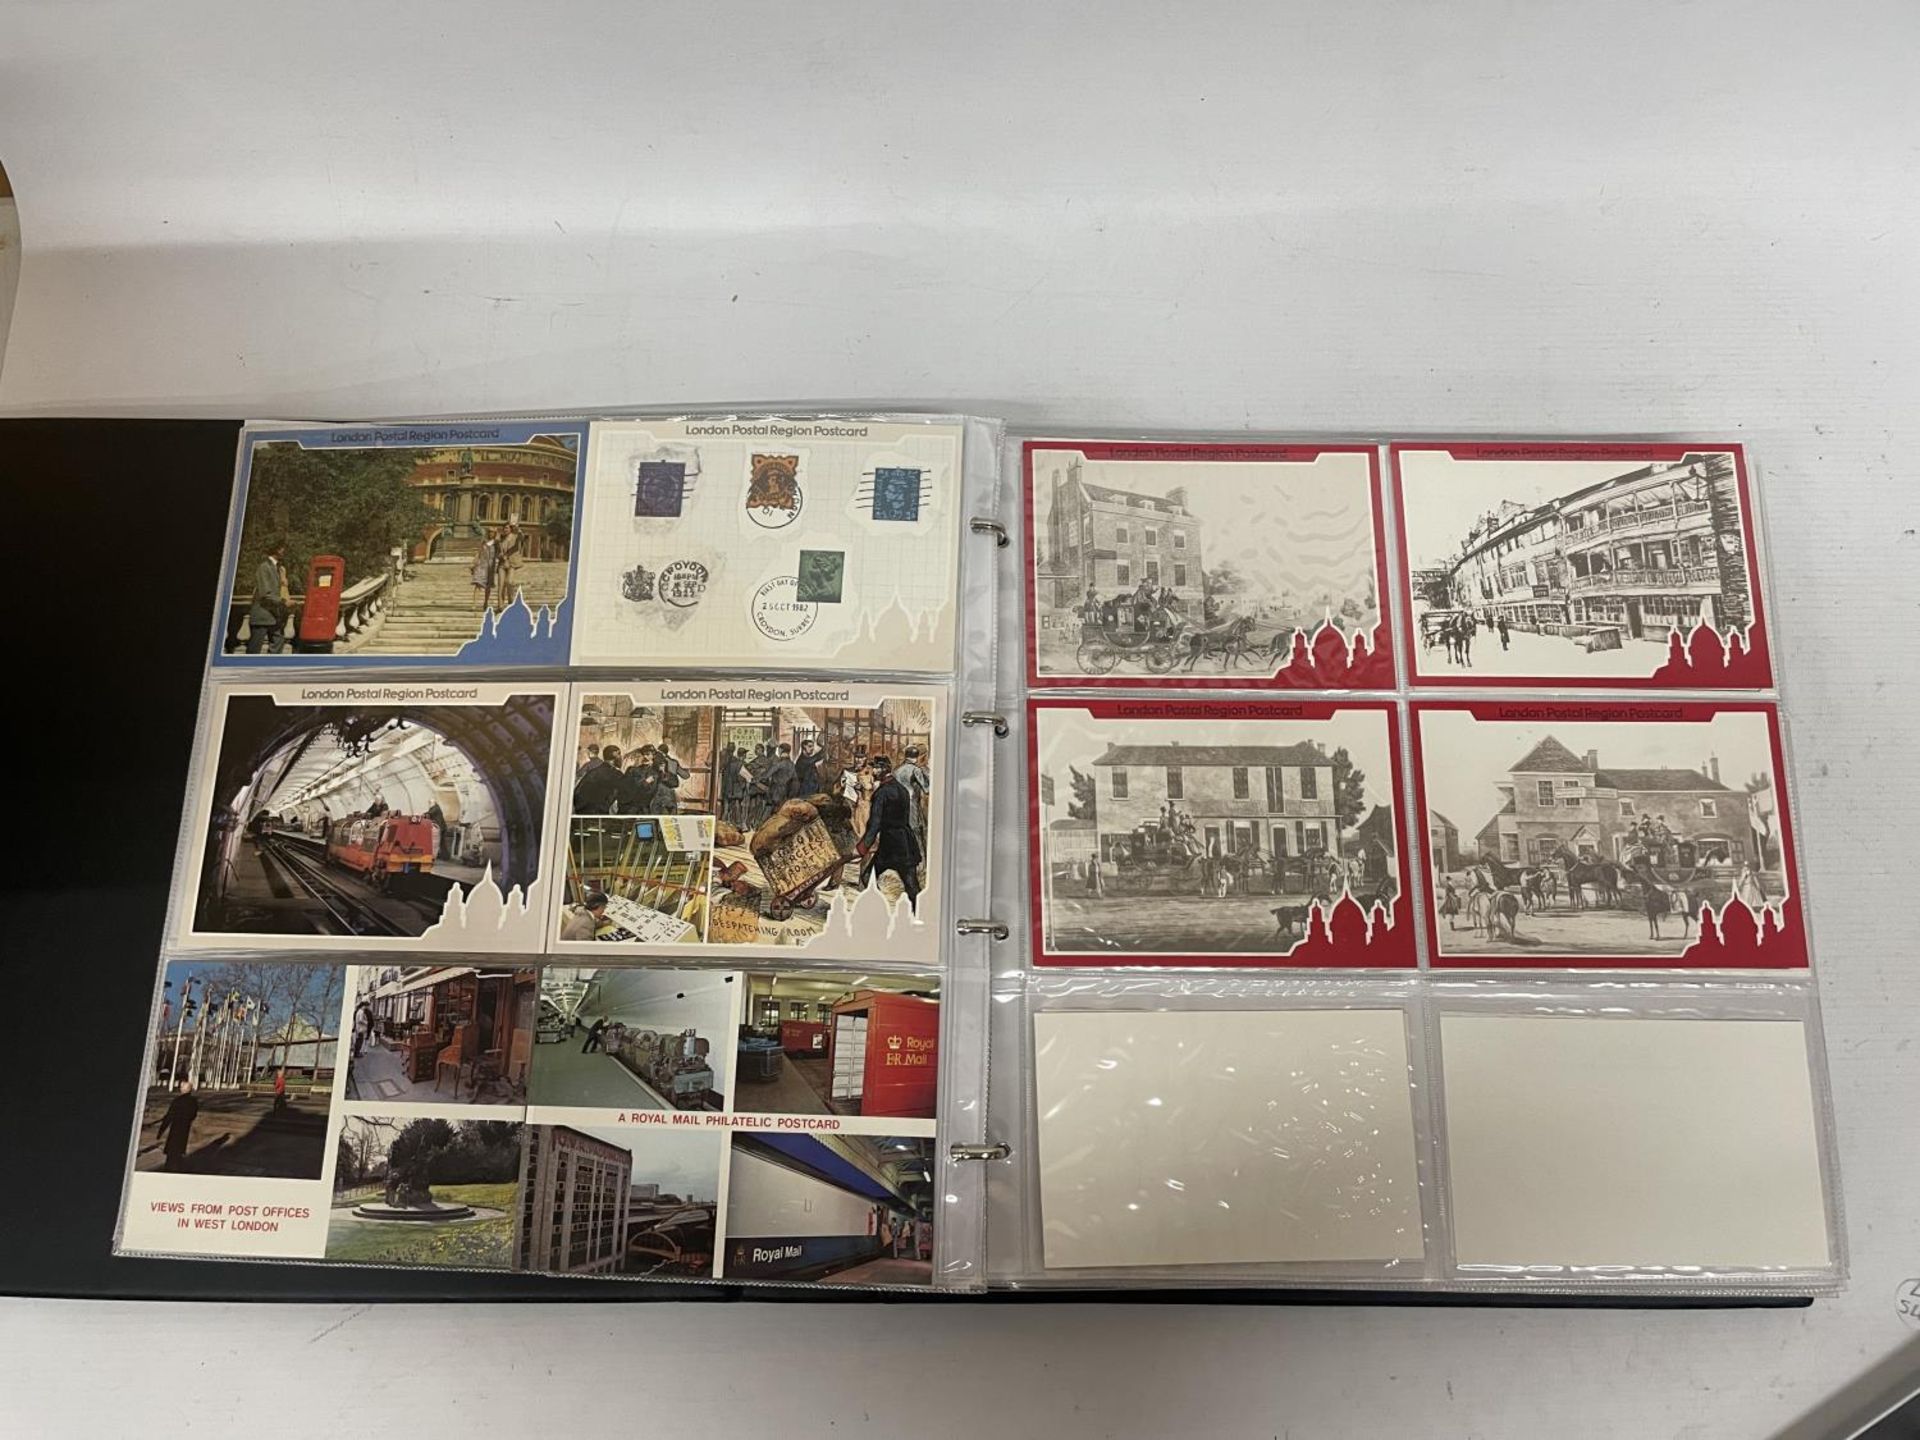 APPROXIMATELY 178 POSTCARDS RELATING TO POSTAL HISTORY AND POST OFFICE REGIONAL CARDS IN A FOLDER